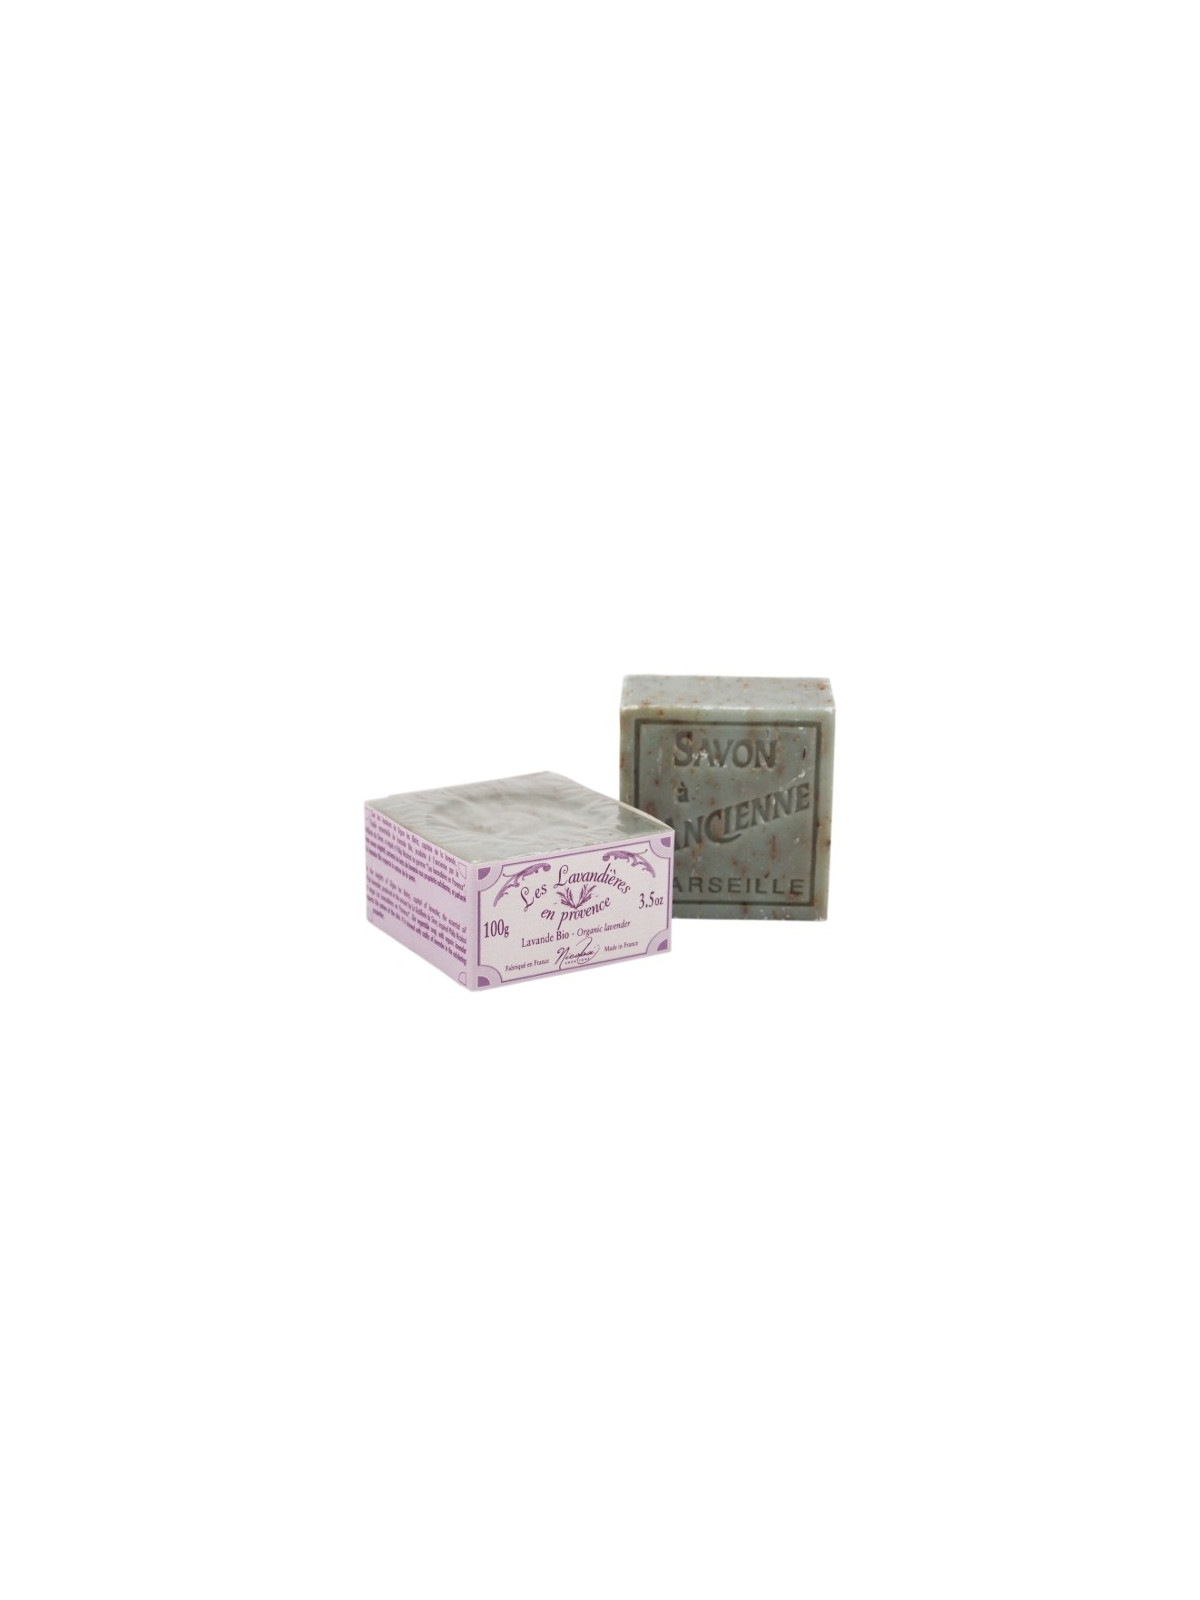 Soap of Marseille with lavander oil